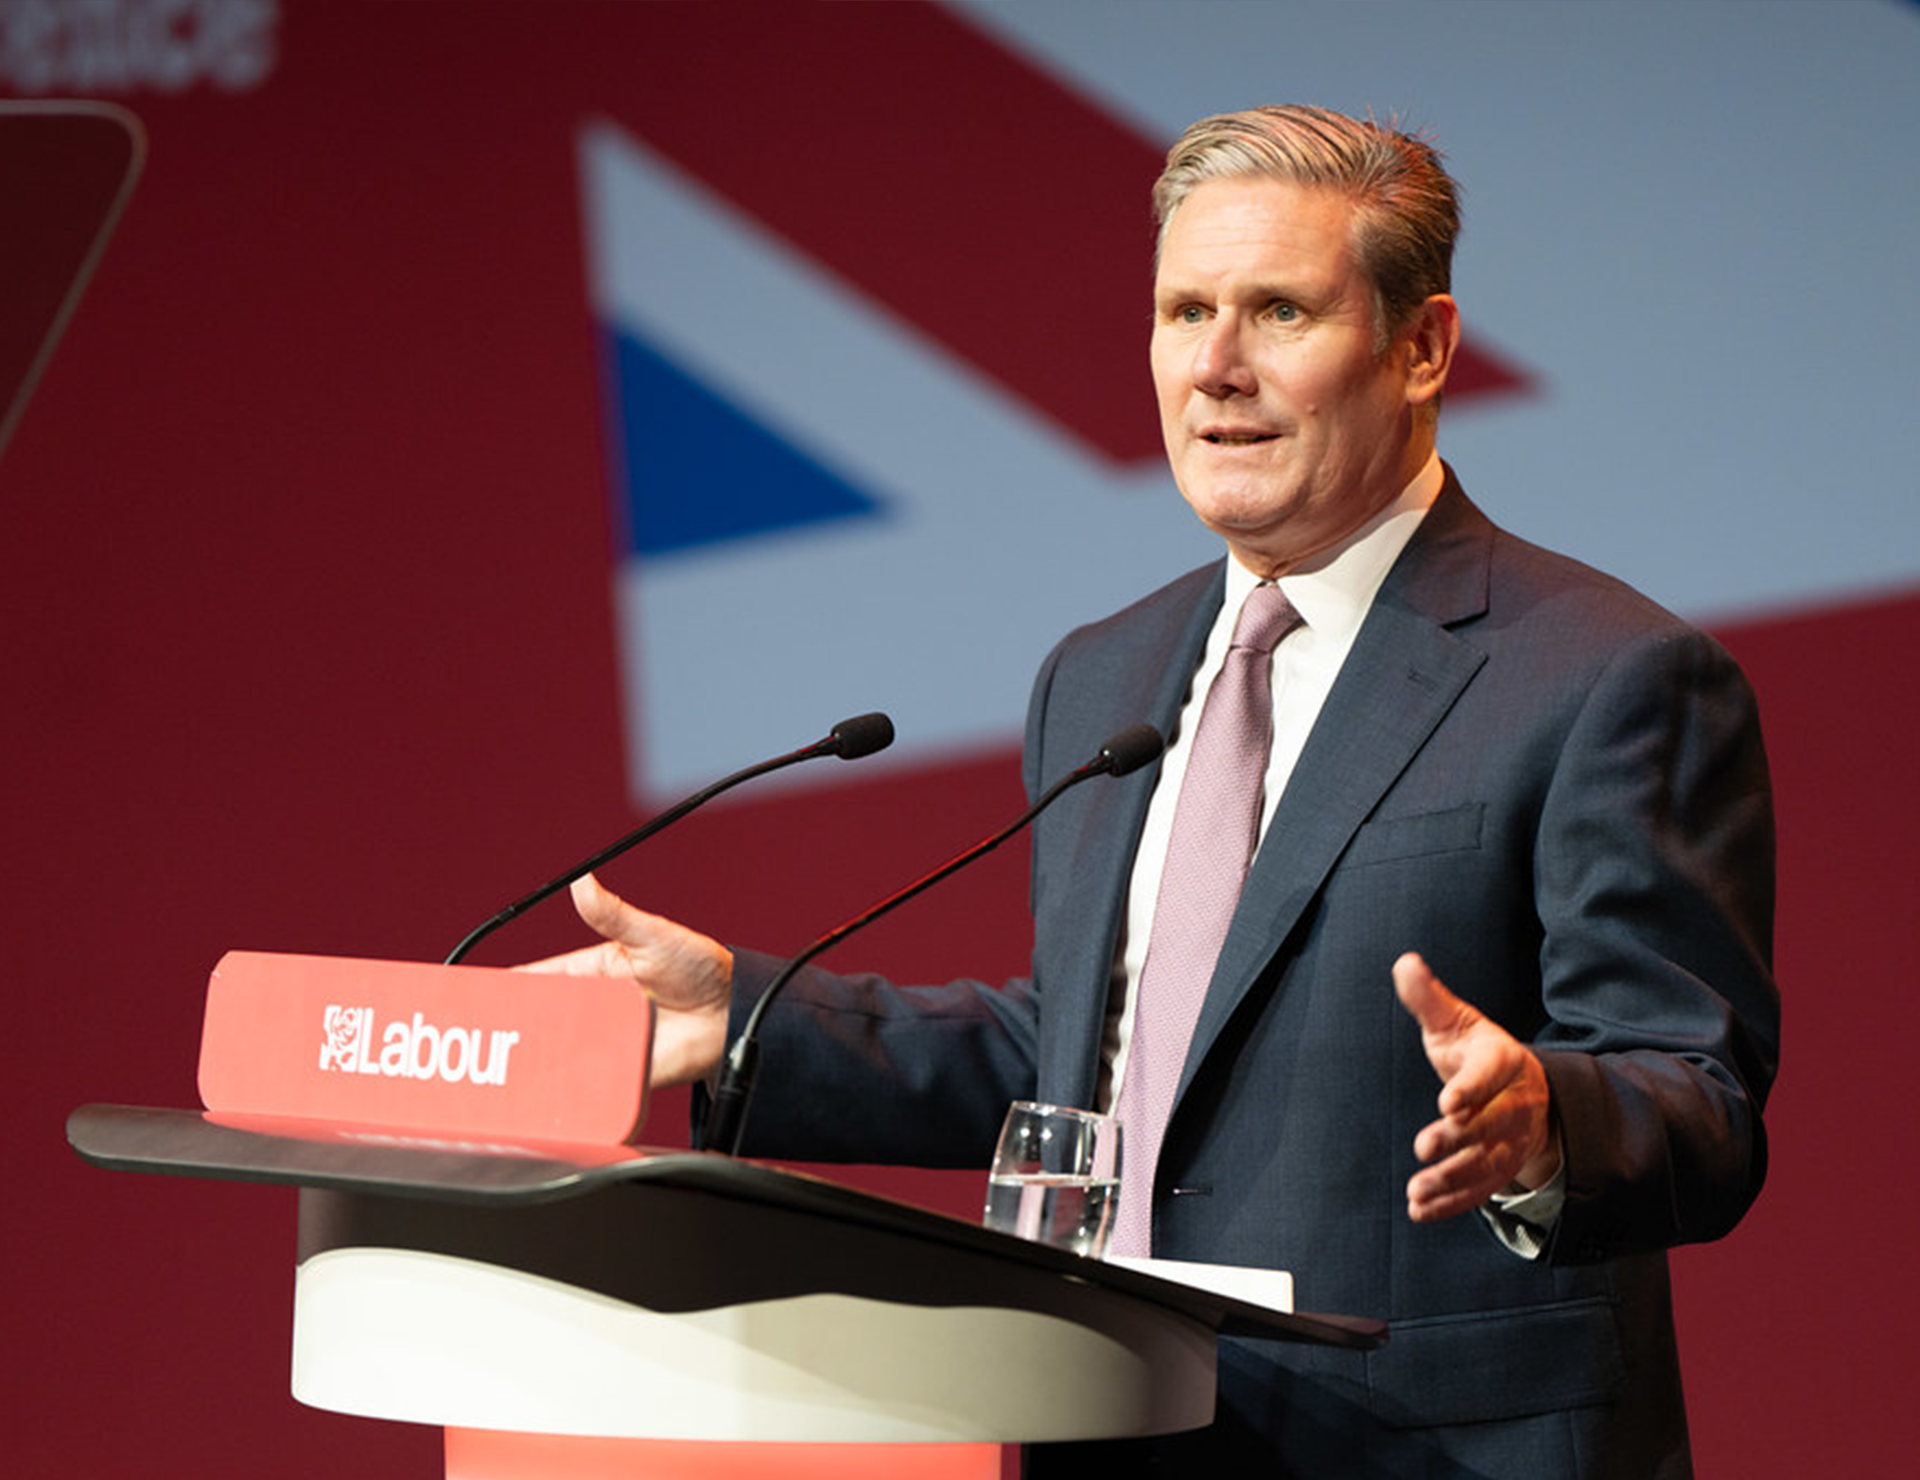 UK General Elections 2024: Labour to the top seat?